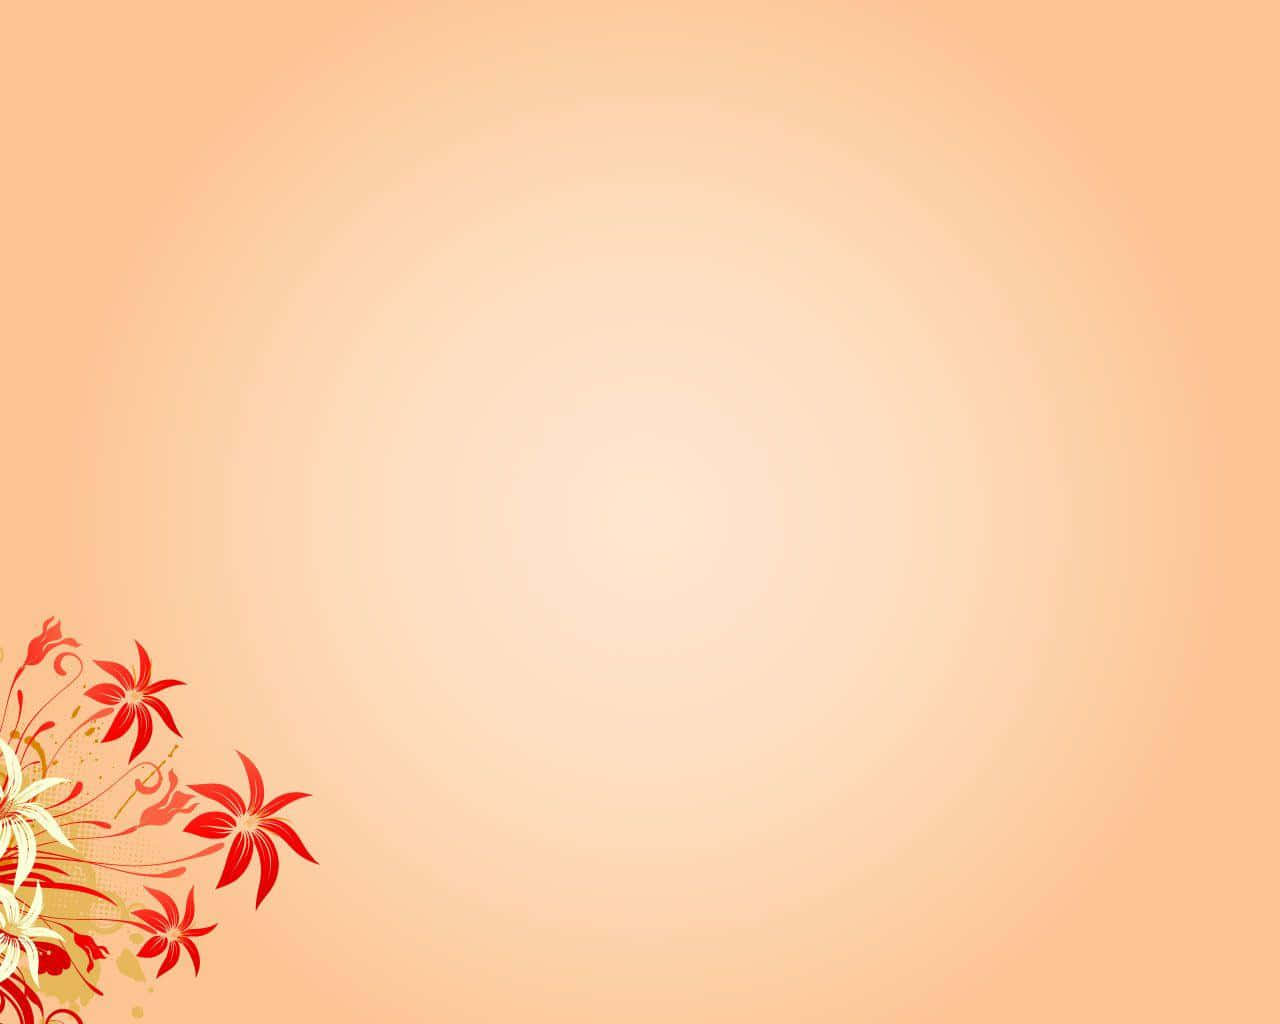 a background with flowers and leaves on it